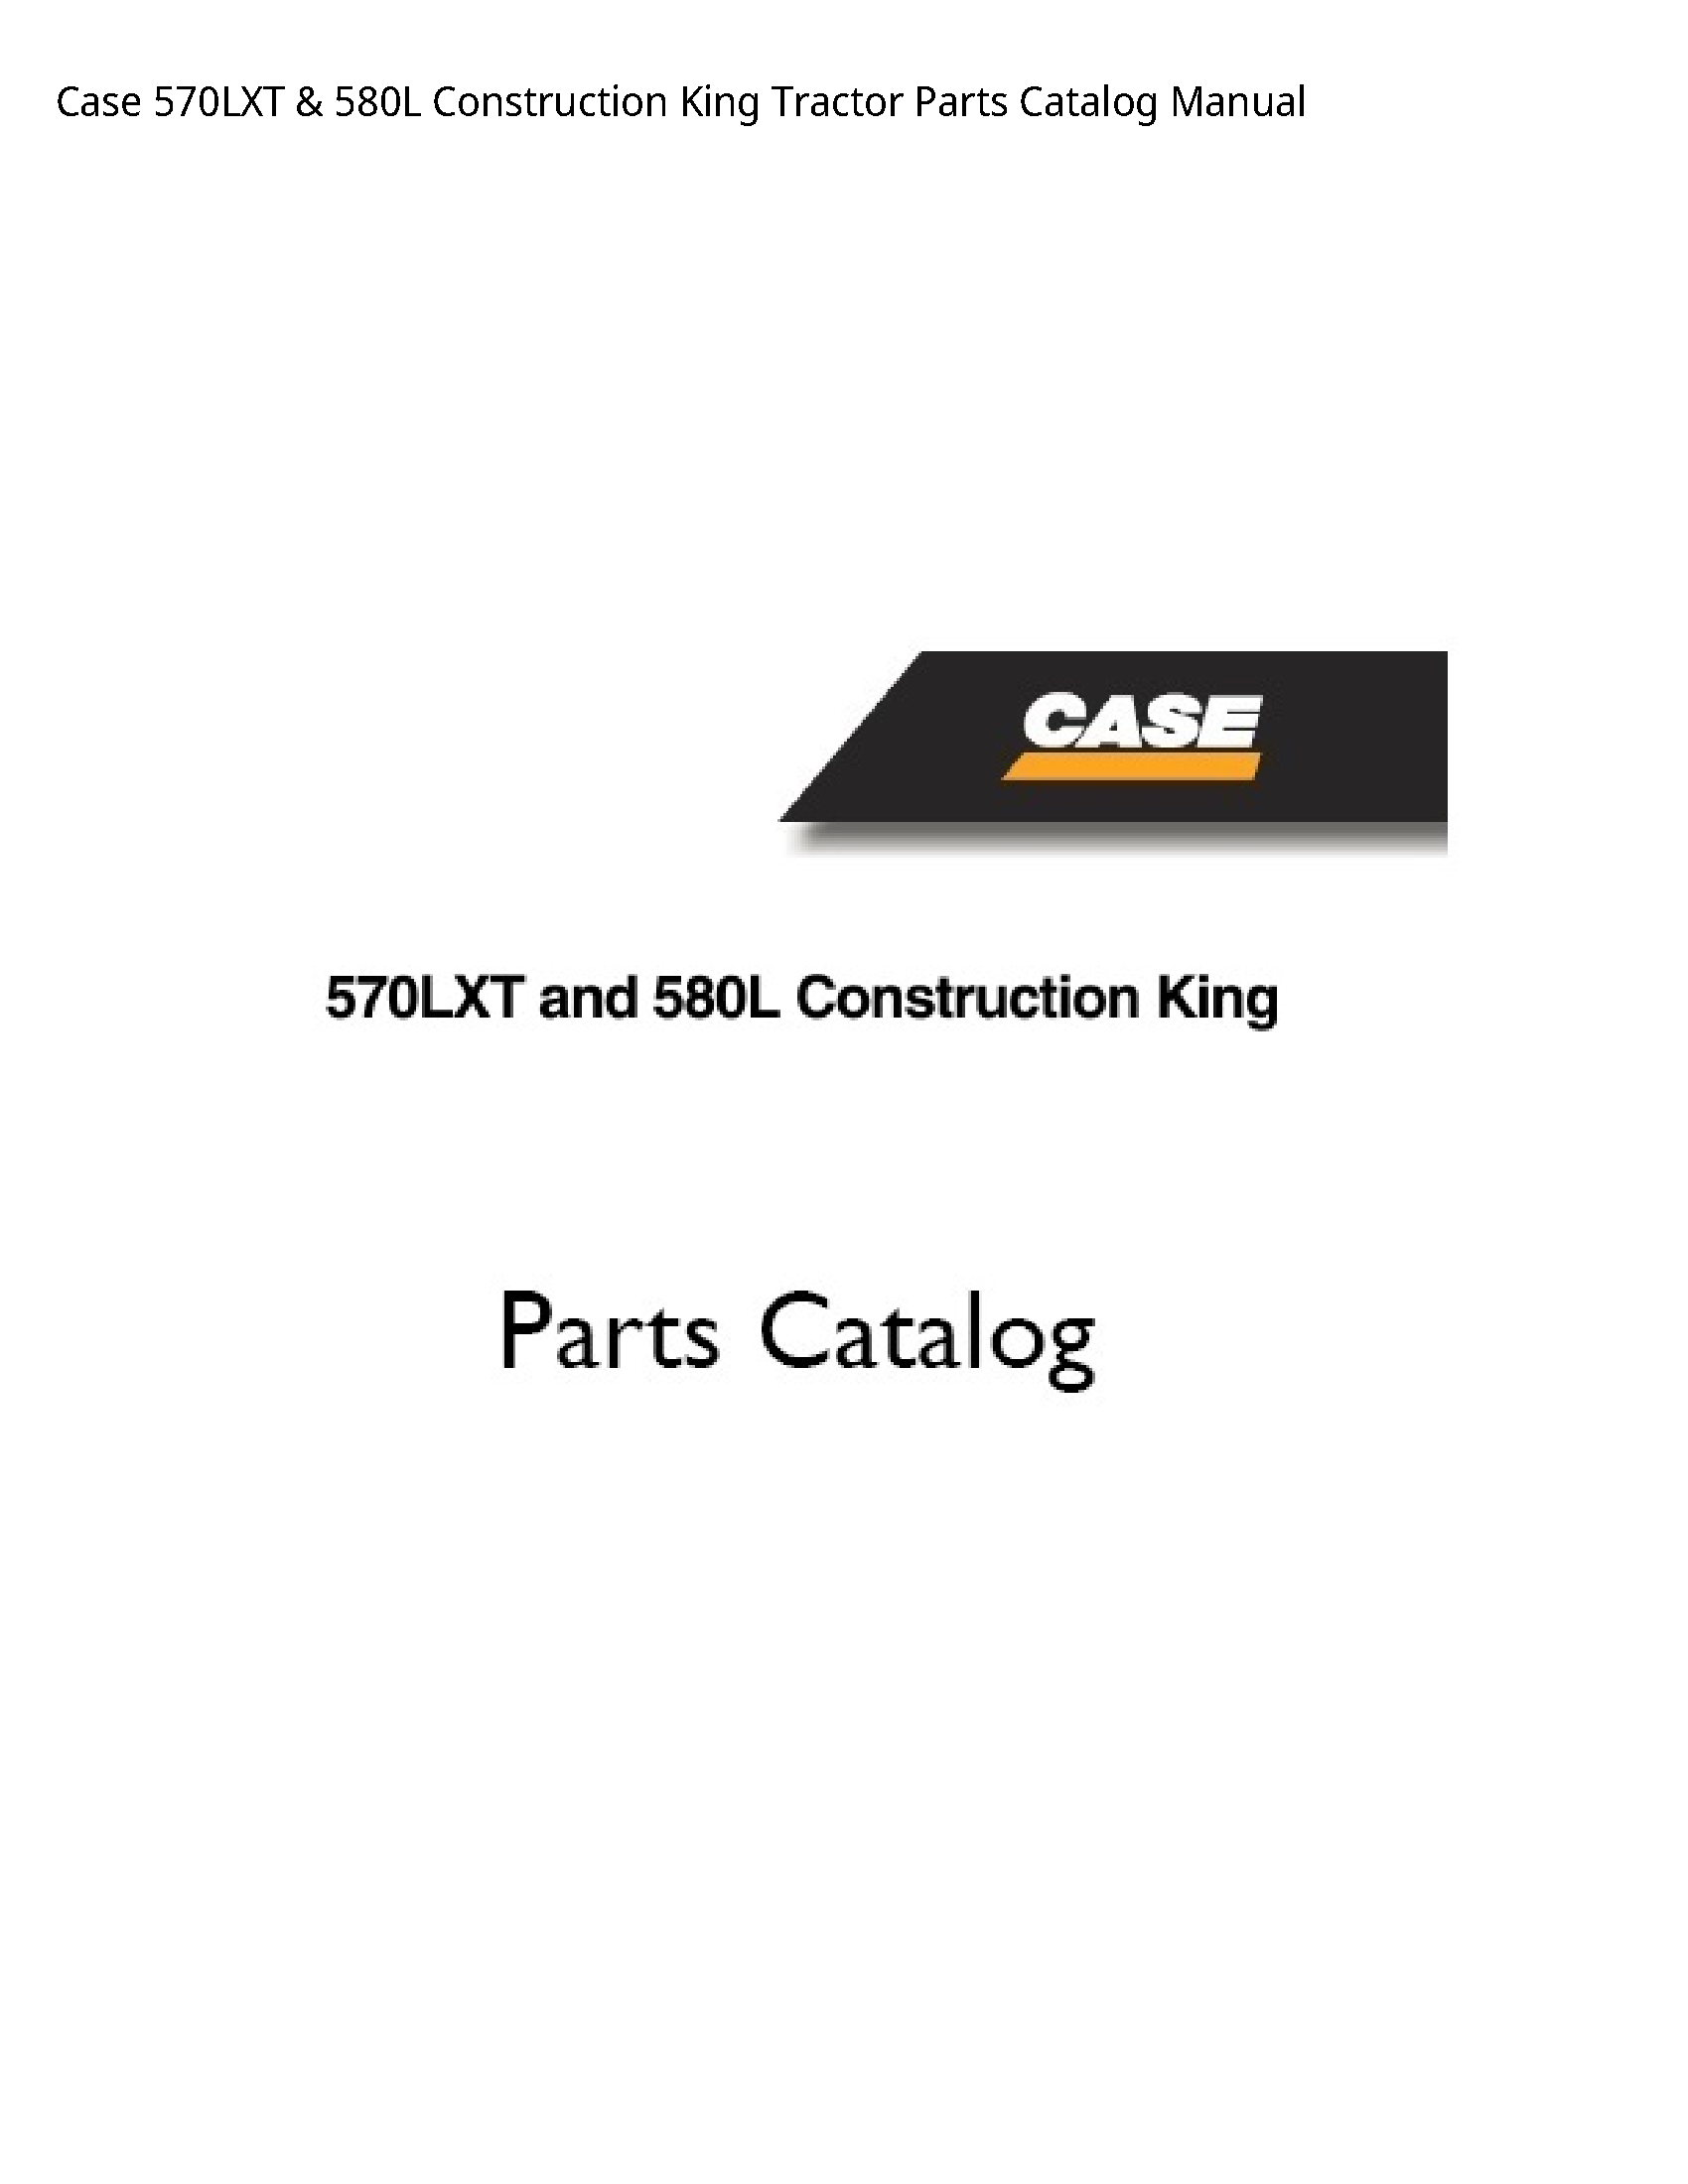 Case/Case IH 570LXT Construction King Tractor Parts Catalog manual